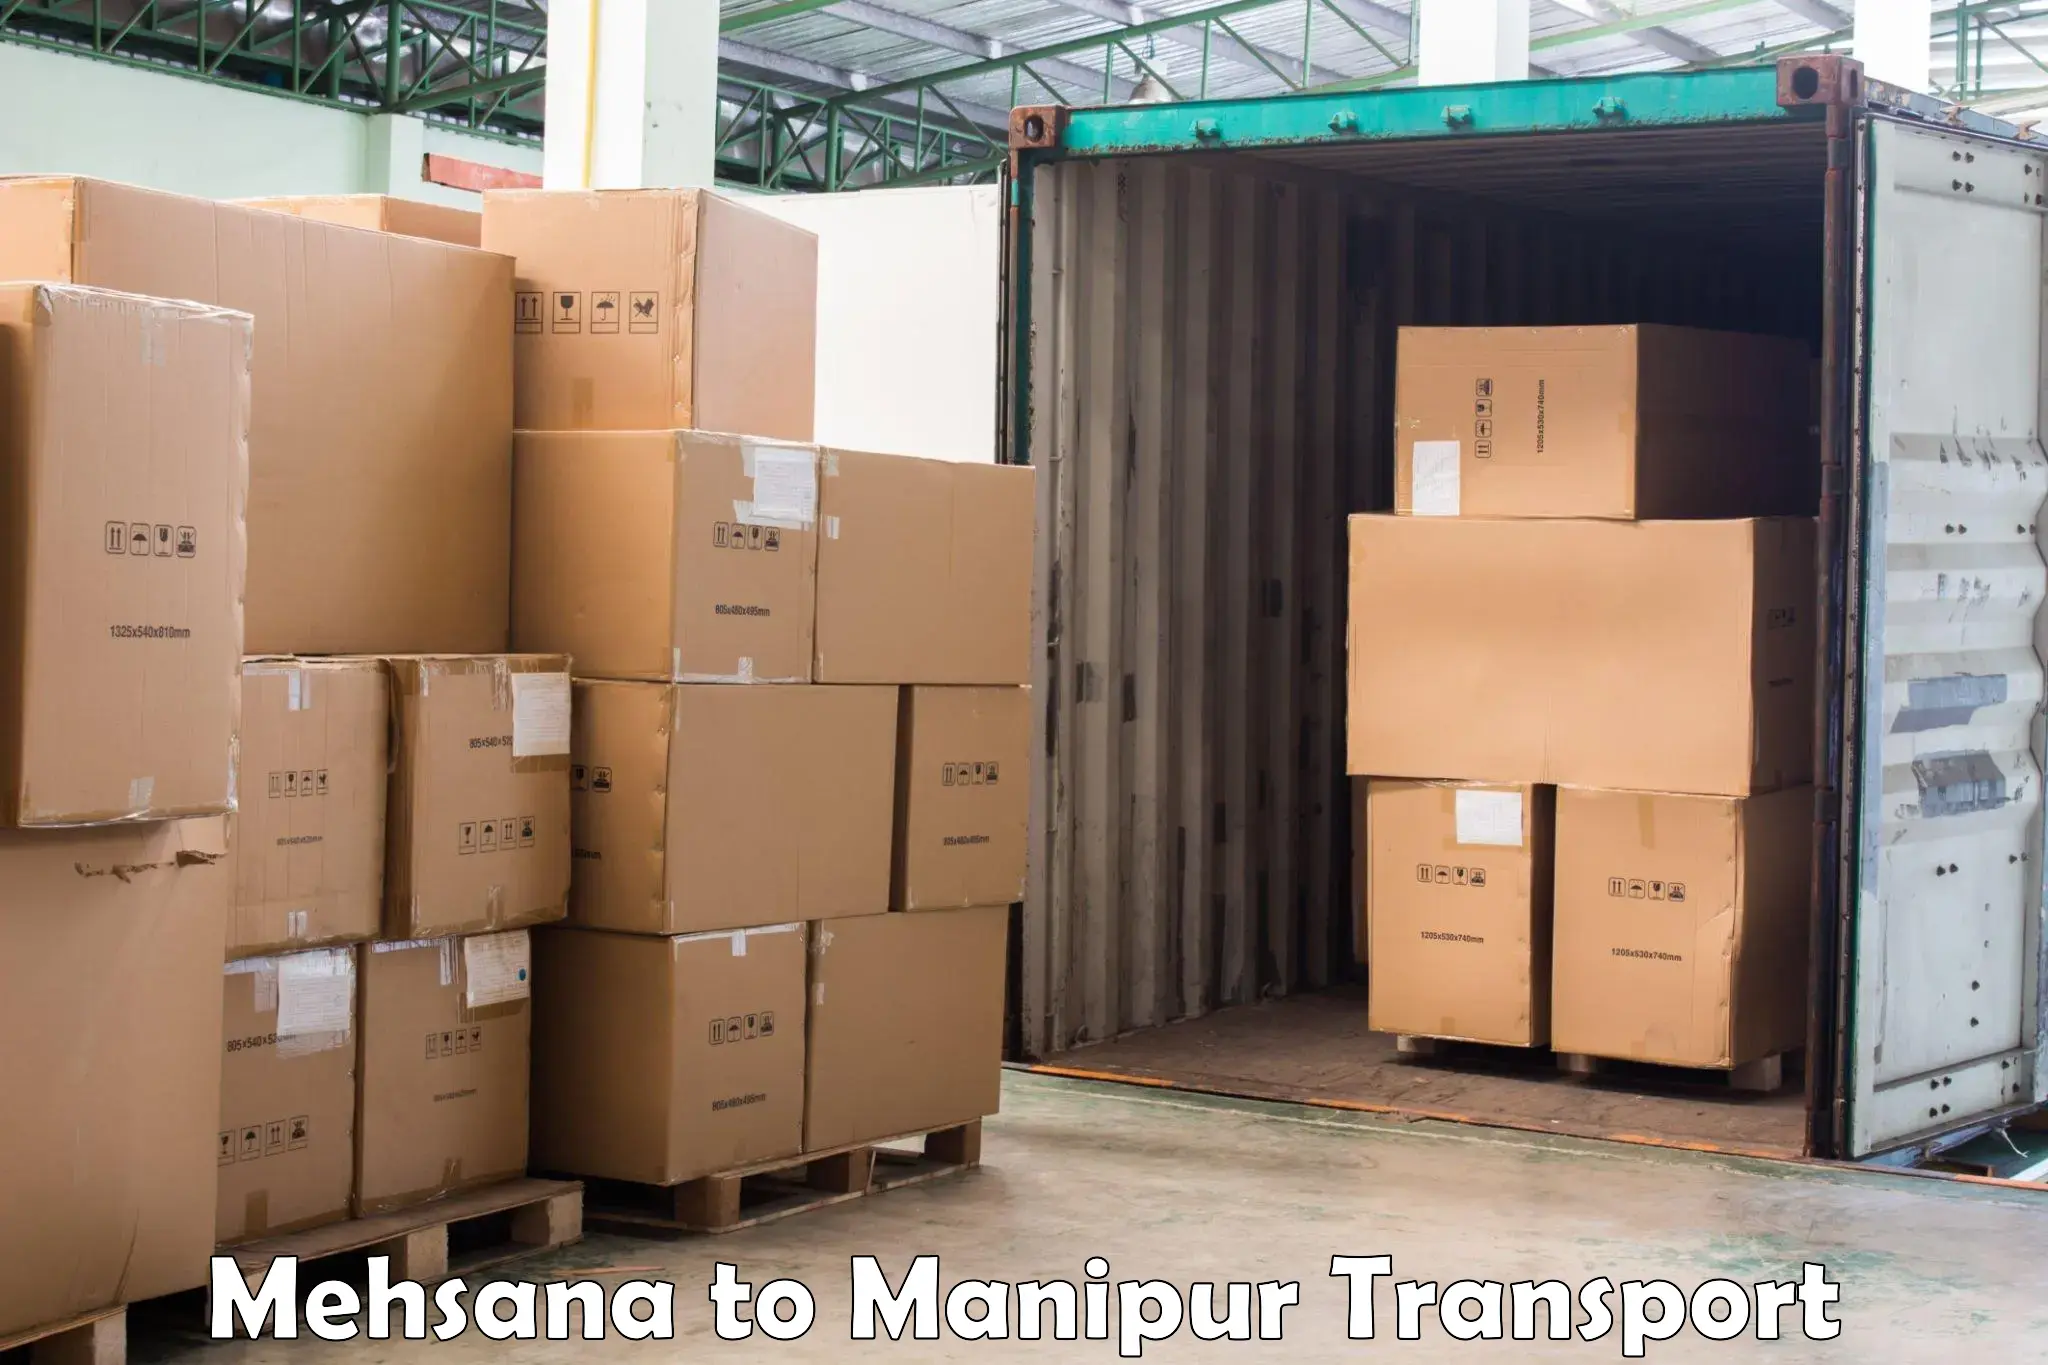 Sending bike to another city Mehsana to Manipur